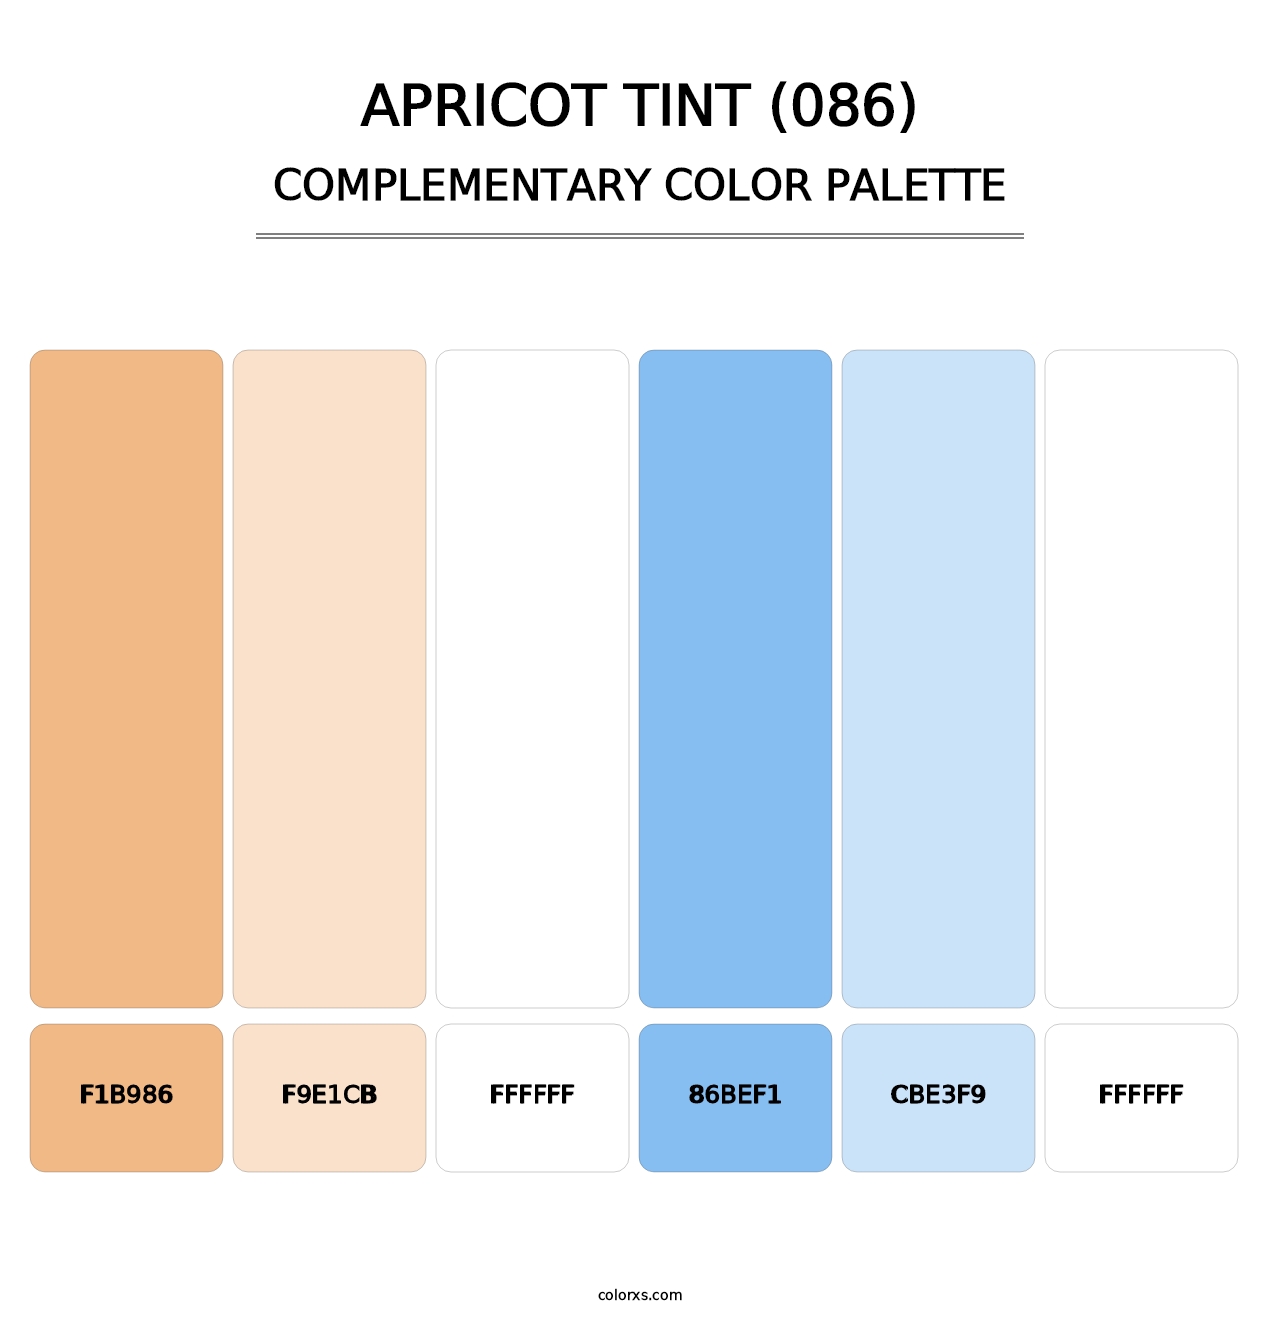 Apricot Tint (086) - Complementary Color Palette